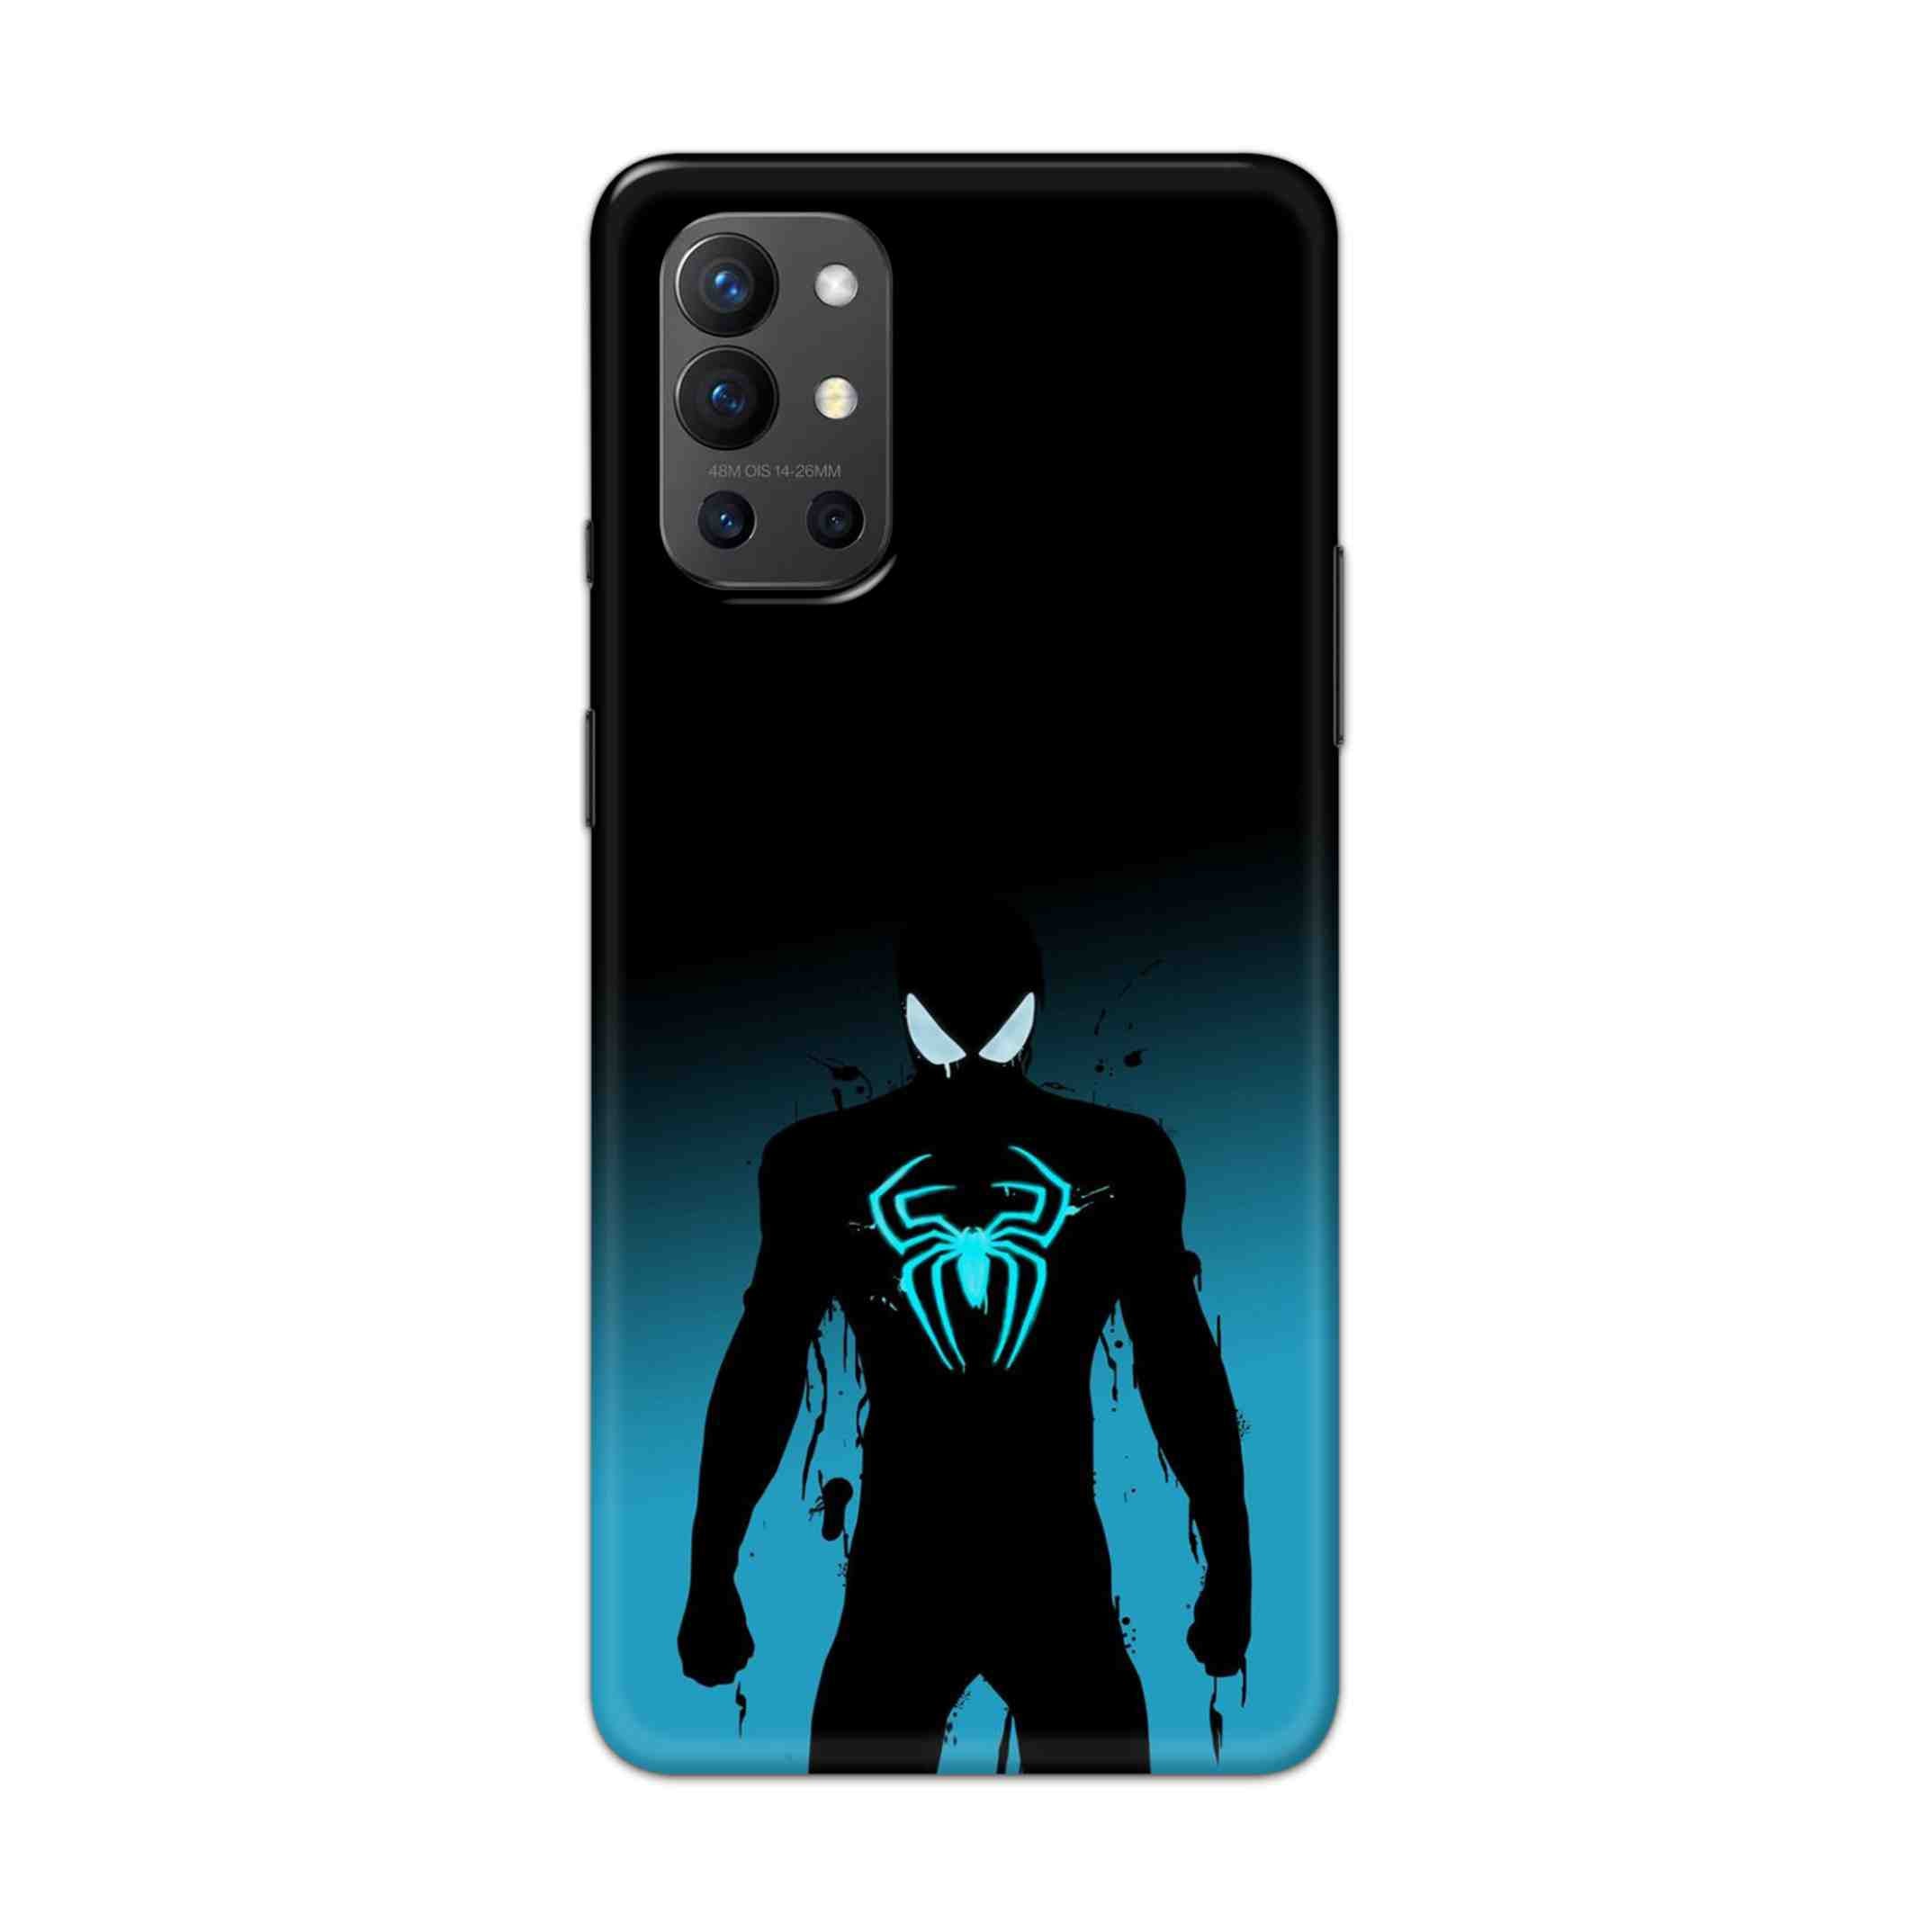 Buy Neon Spiderman Hard Back Mobile Phone Case Cover For OnePlus 9R / 8T Online